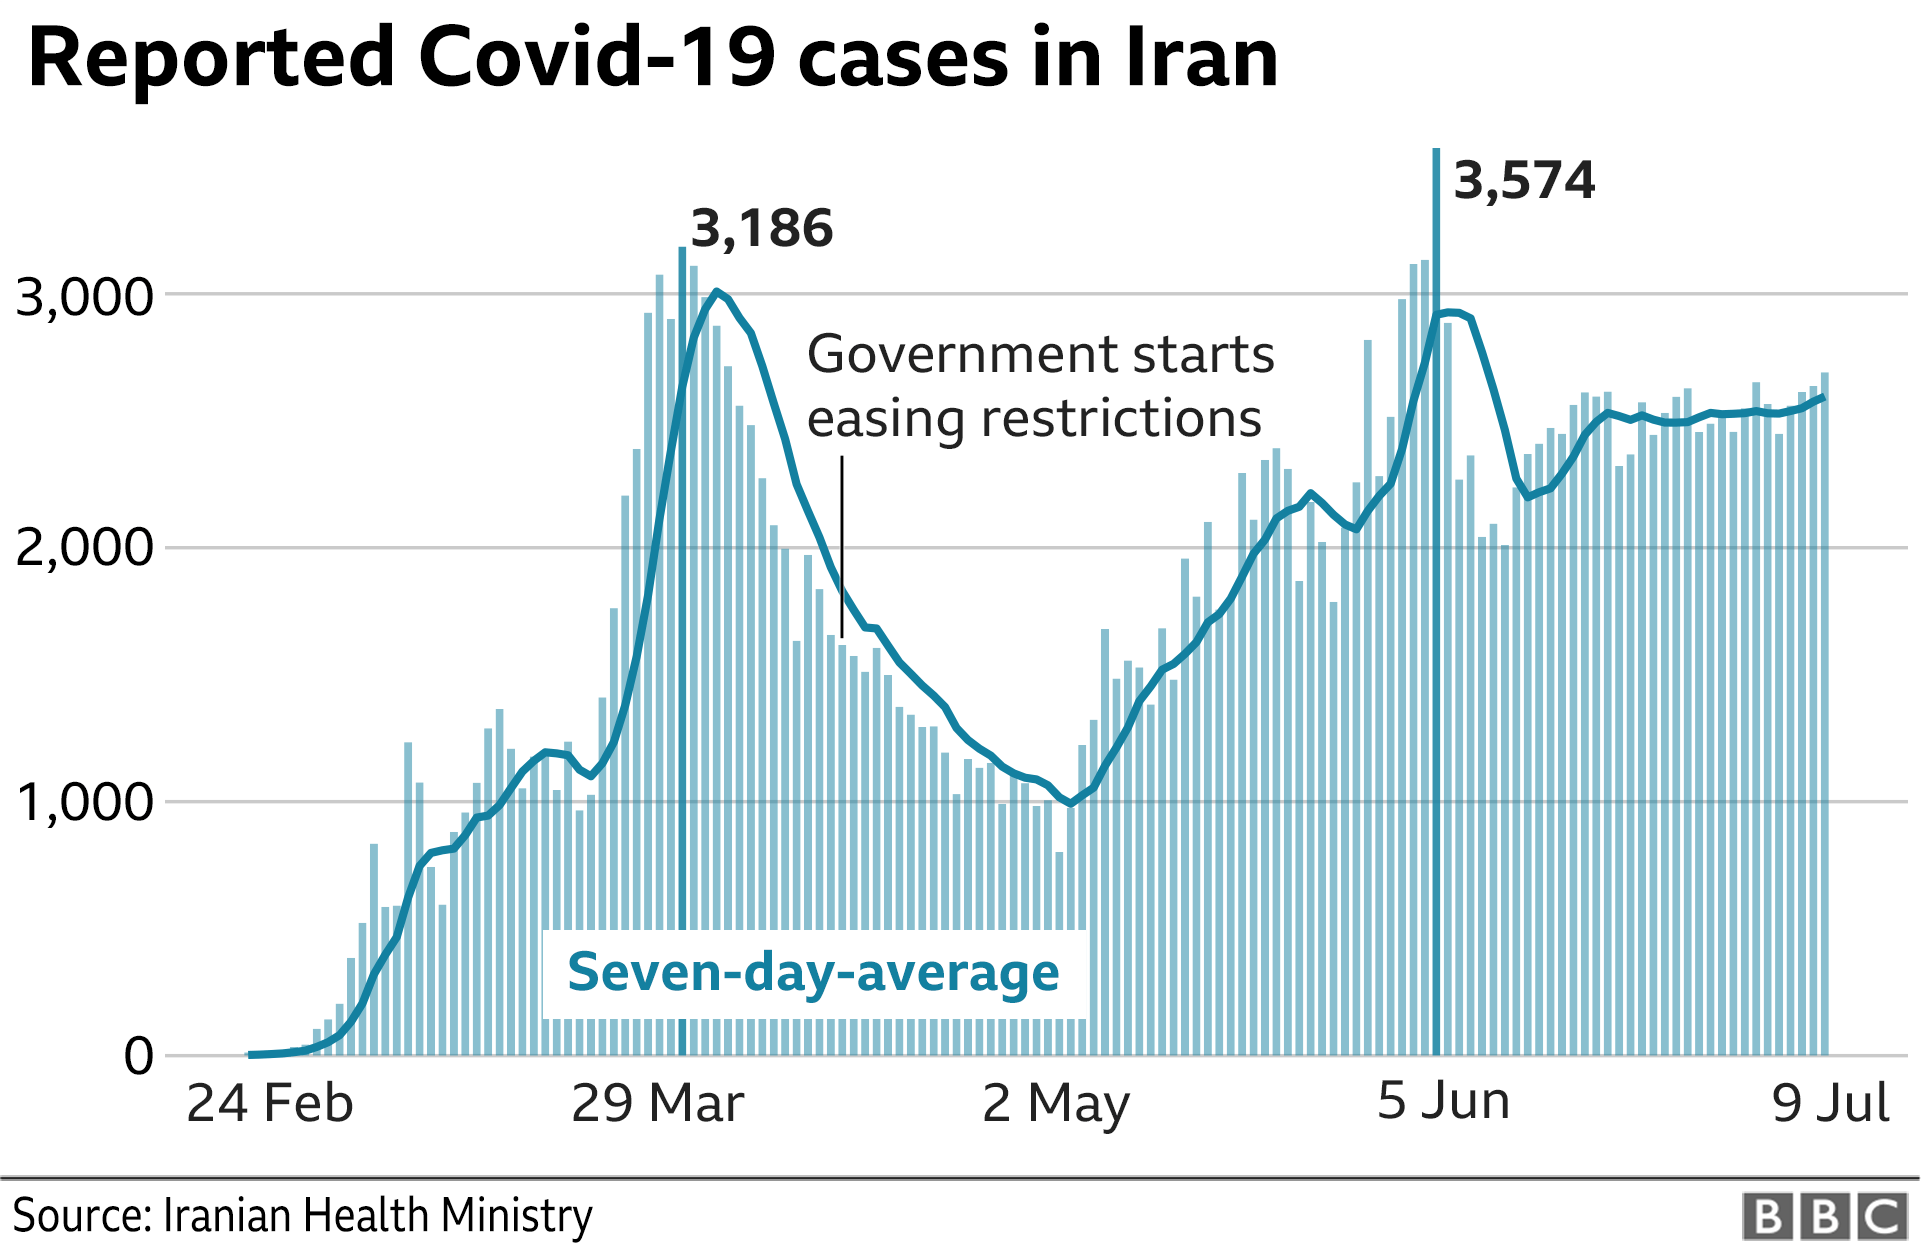 Bar chart showing reported Covid-19 cases in Iran